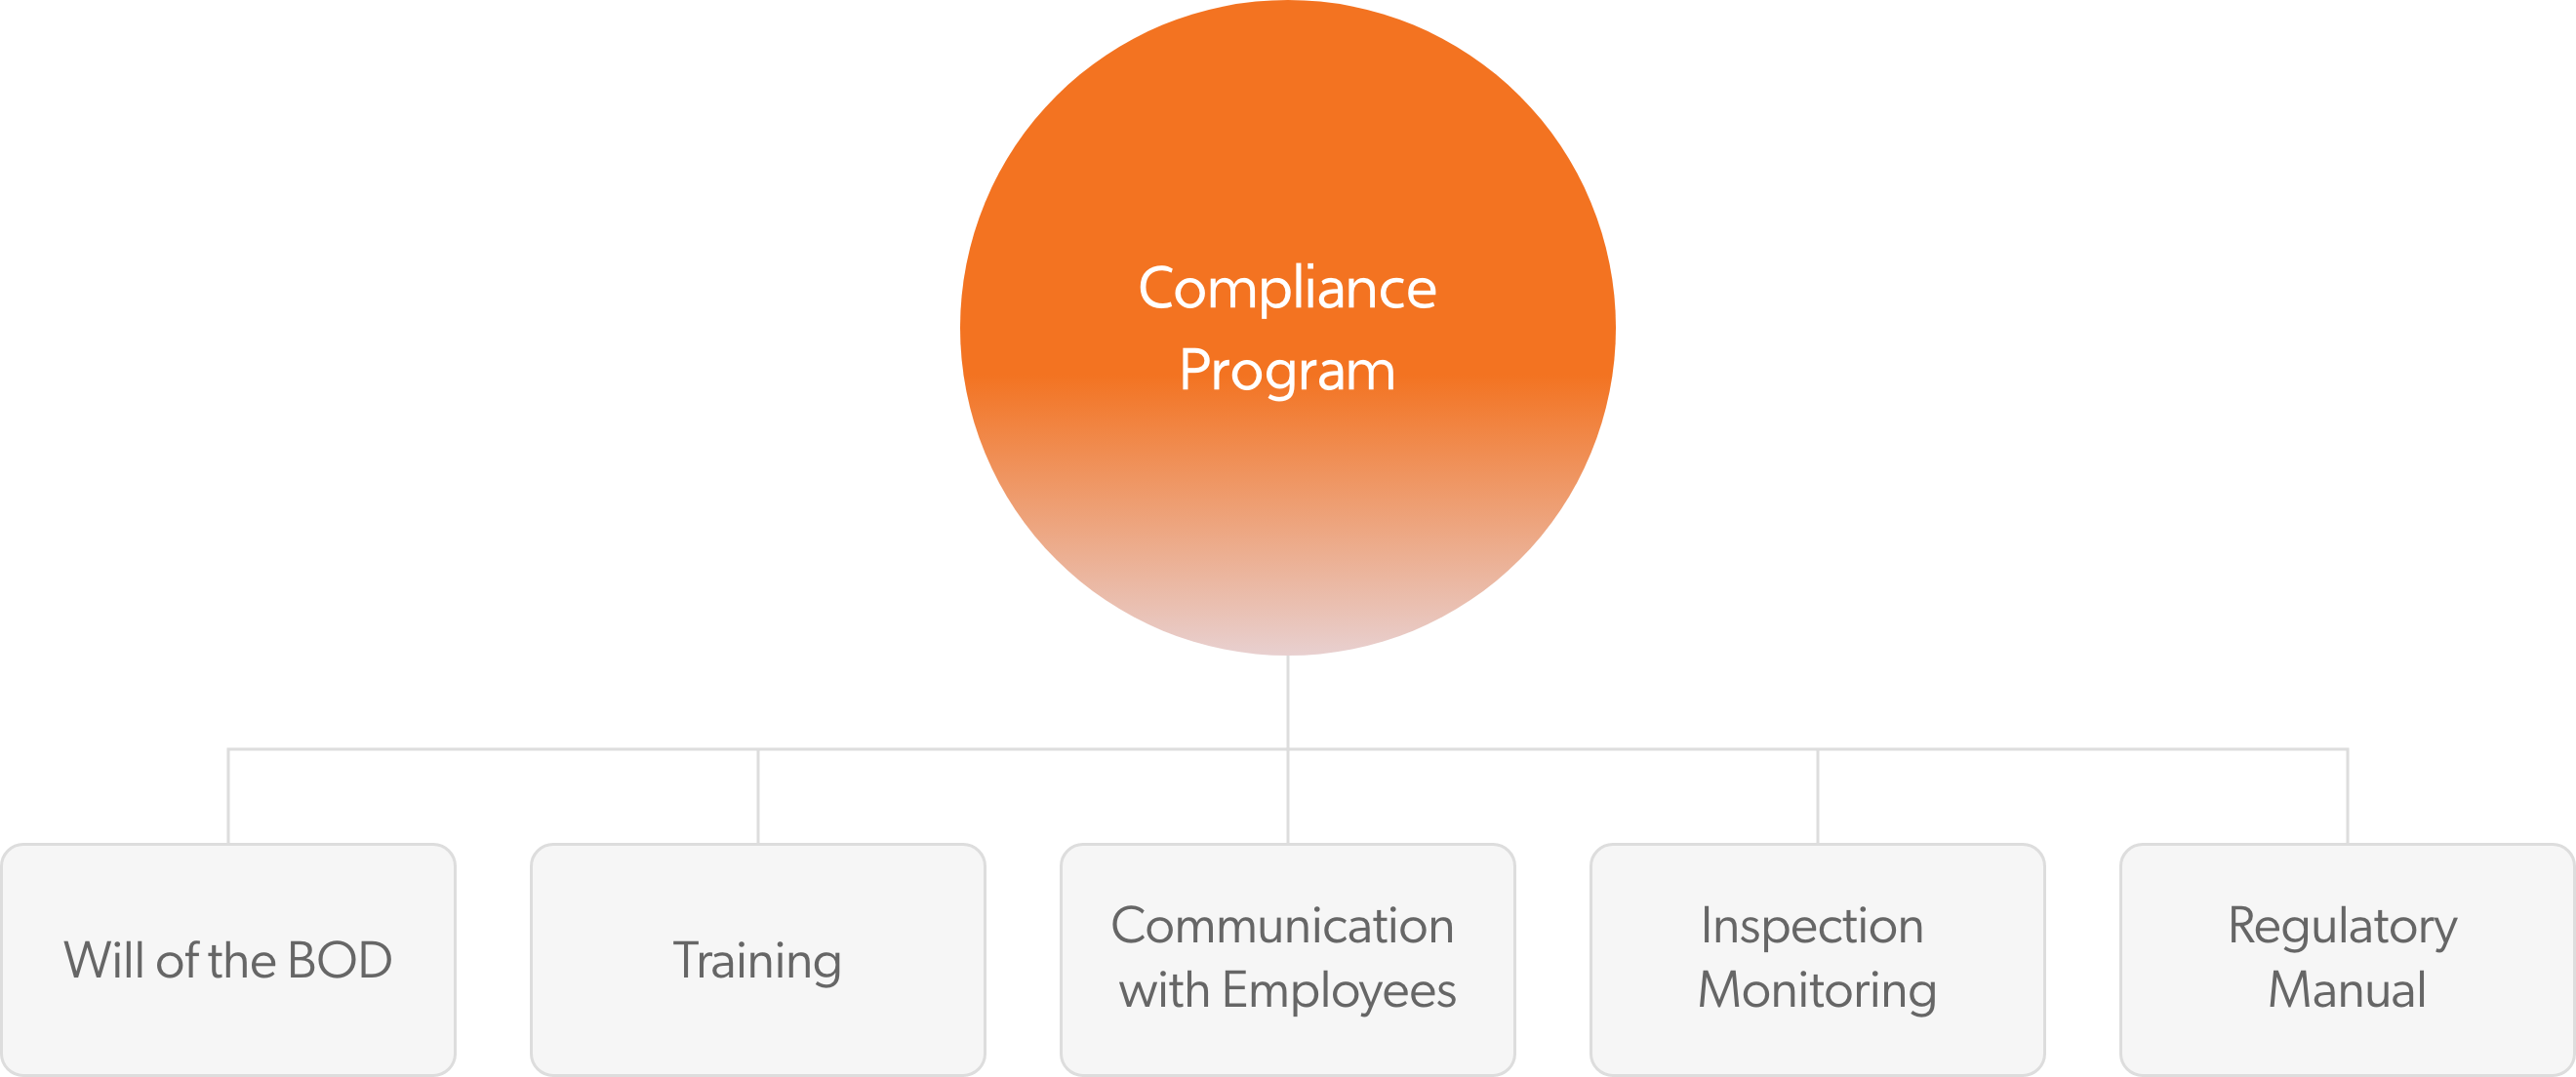 Compliance Program : Will of the BOD, Training, Communication with employees, Inspection monitoring, Regulatory manual